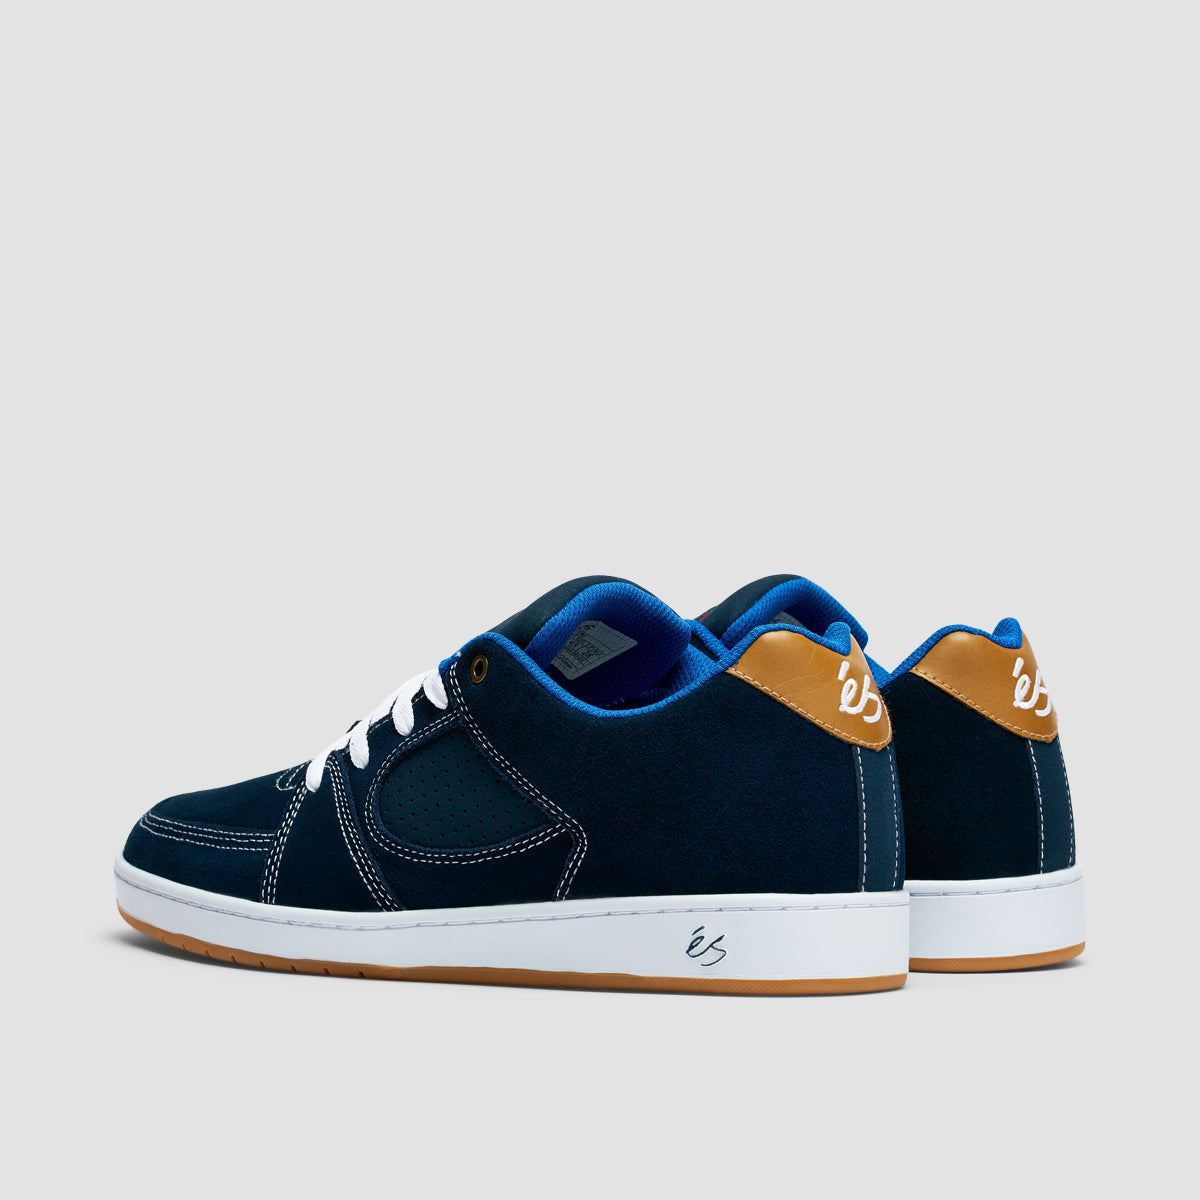 eS Accel Slim Shoes - Navy/White/Red